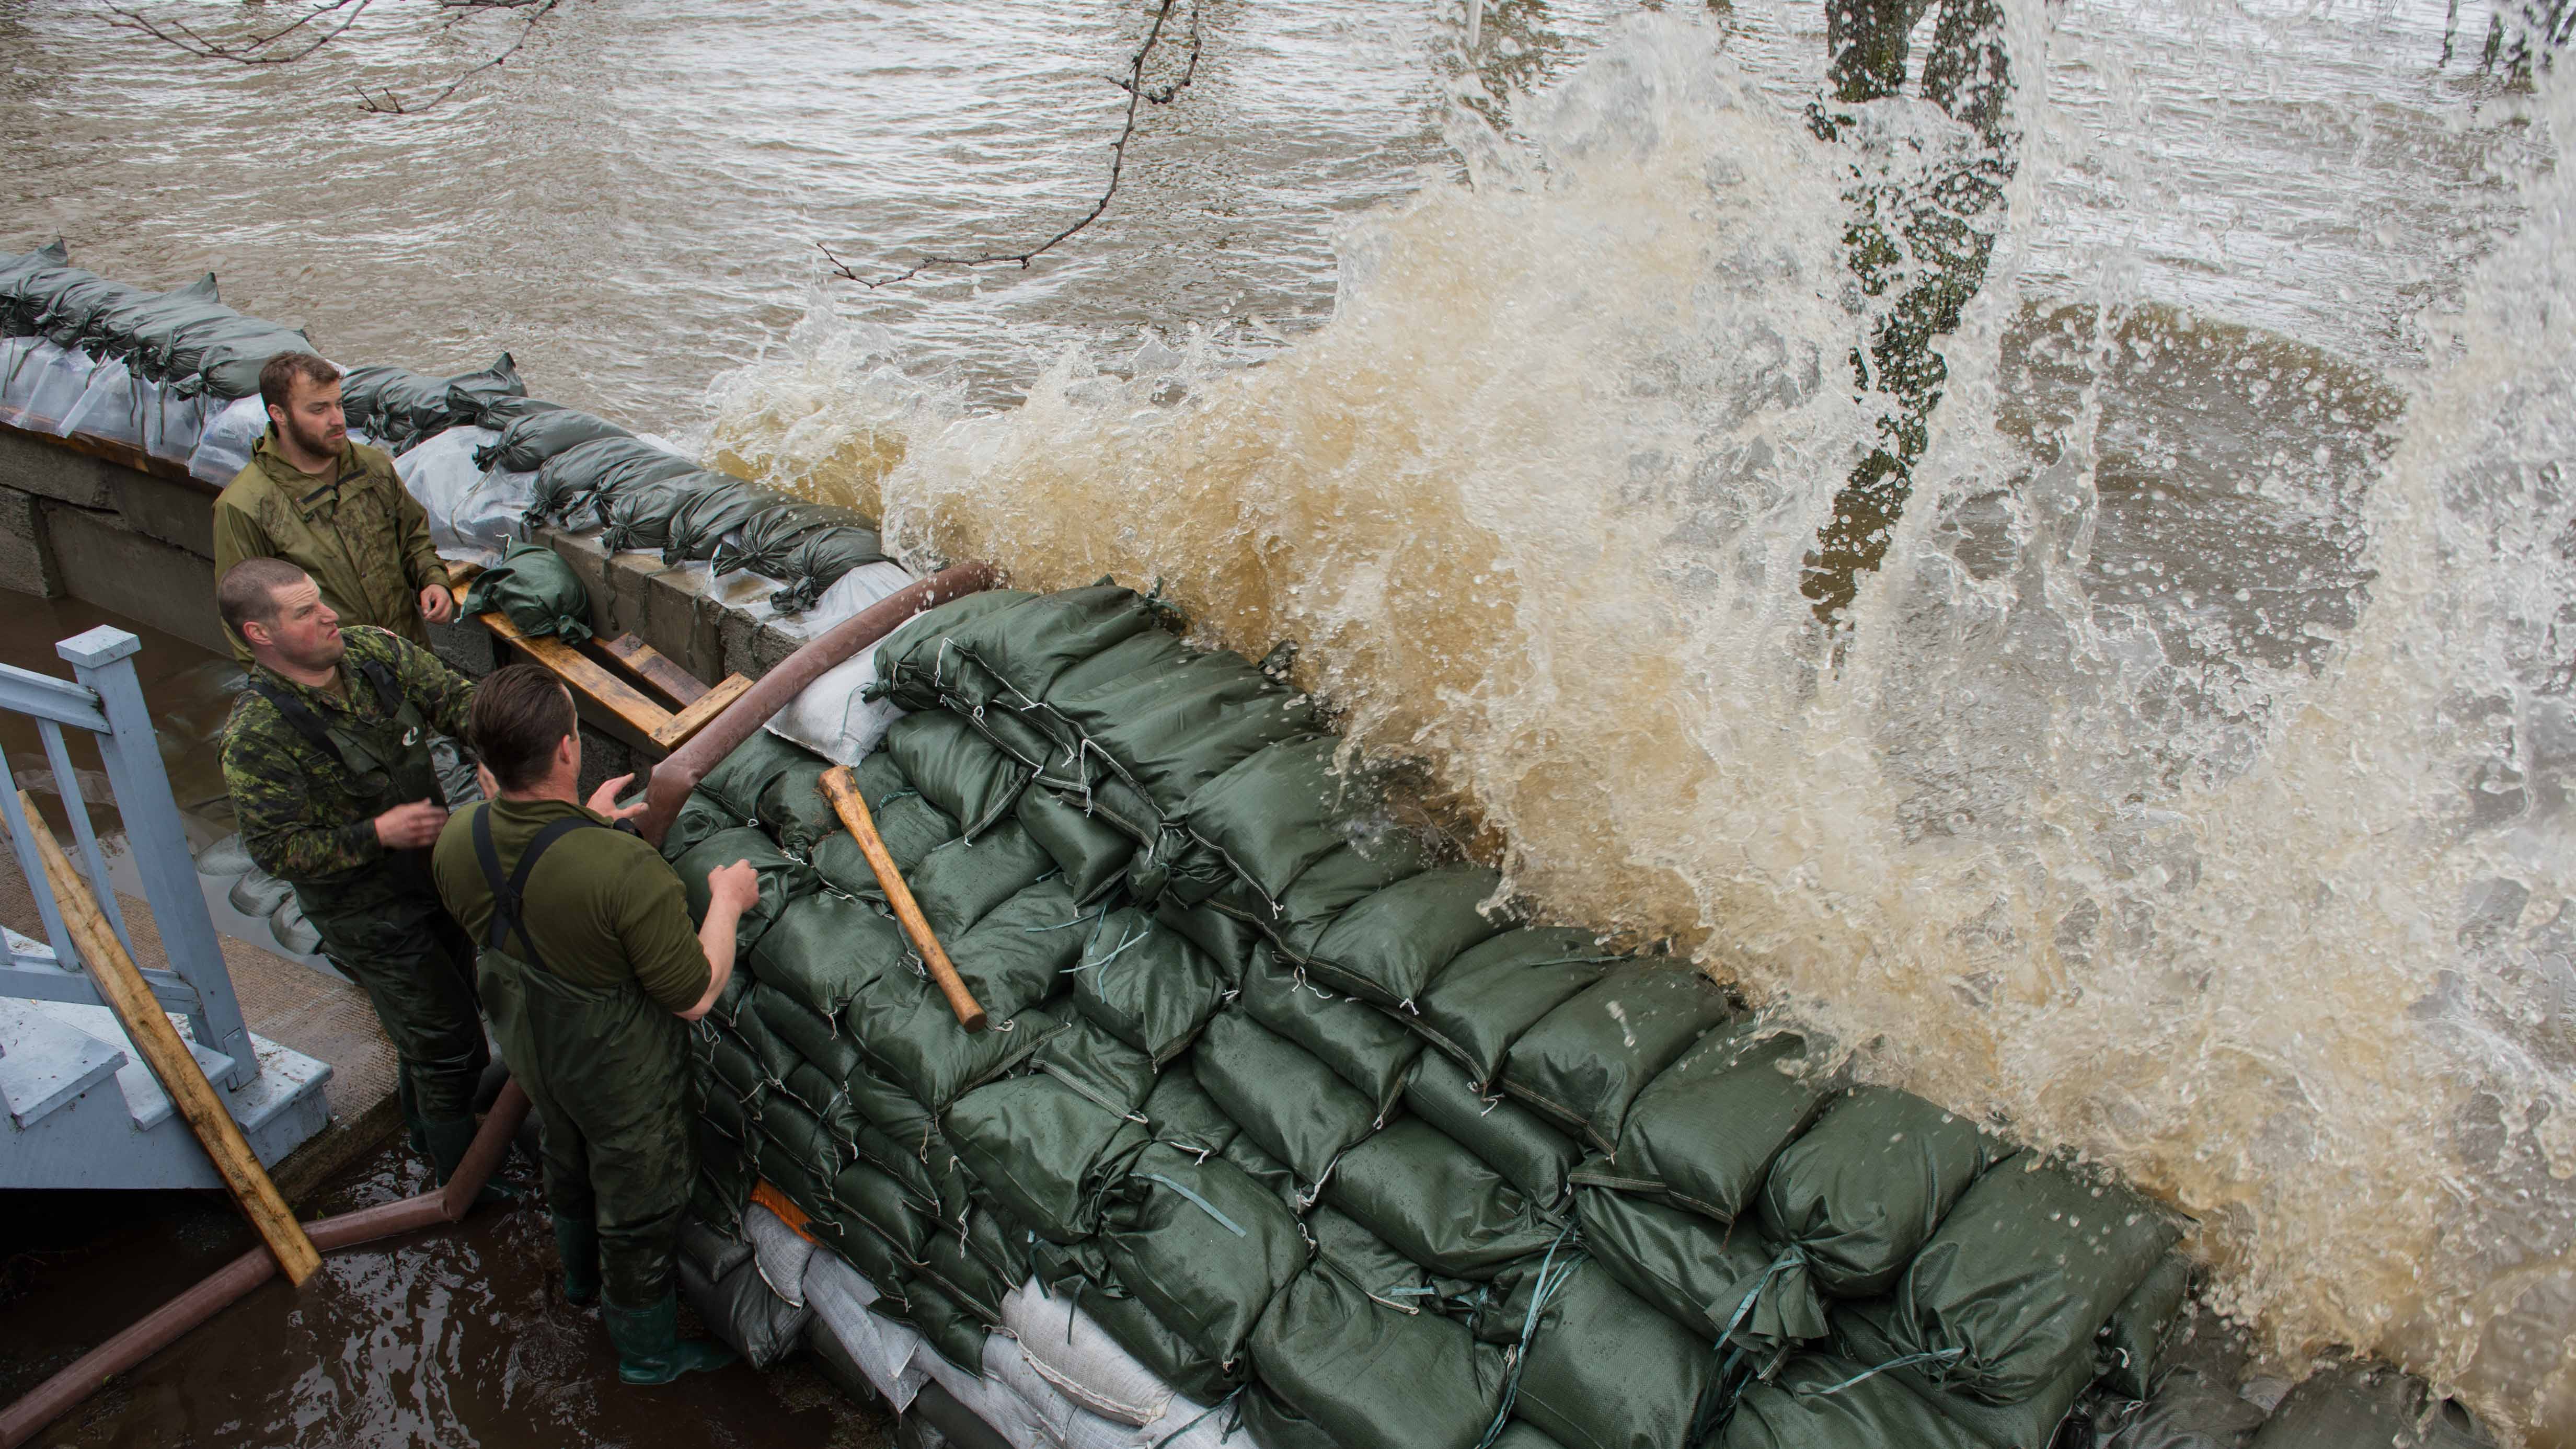 Members of 1st battalion of Royal 22e Régiment participate in Operation LENTUS in response to flooding in some regions of Quebec on May 9, 2017. (photo: Corporal Myki Poirier-Joyal, Imaging services St-Jean/Montreal)